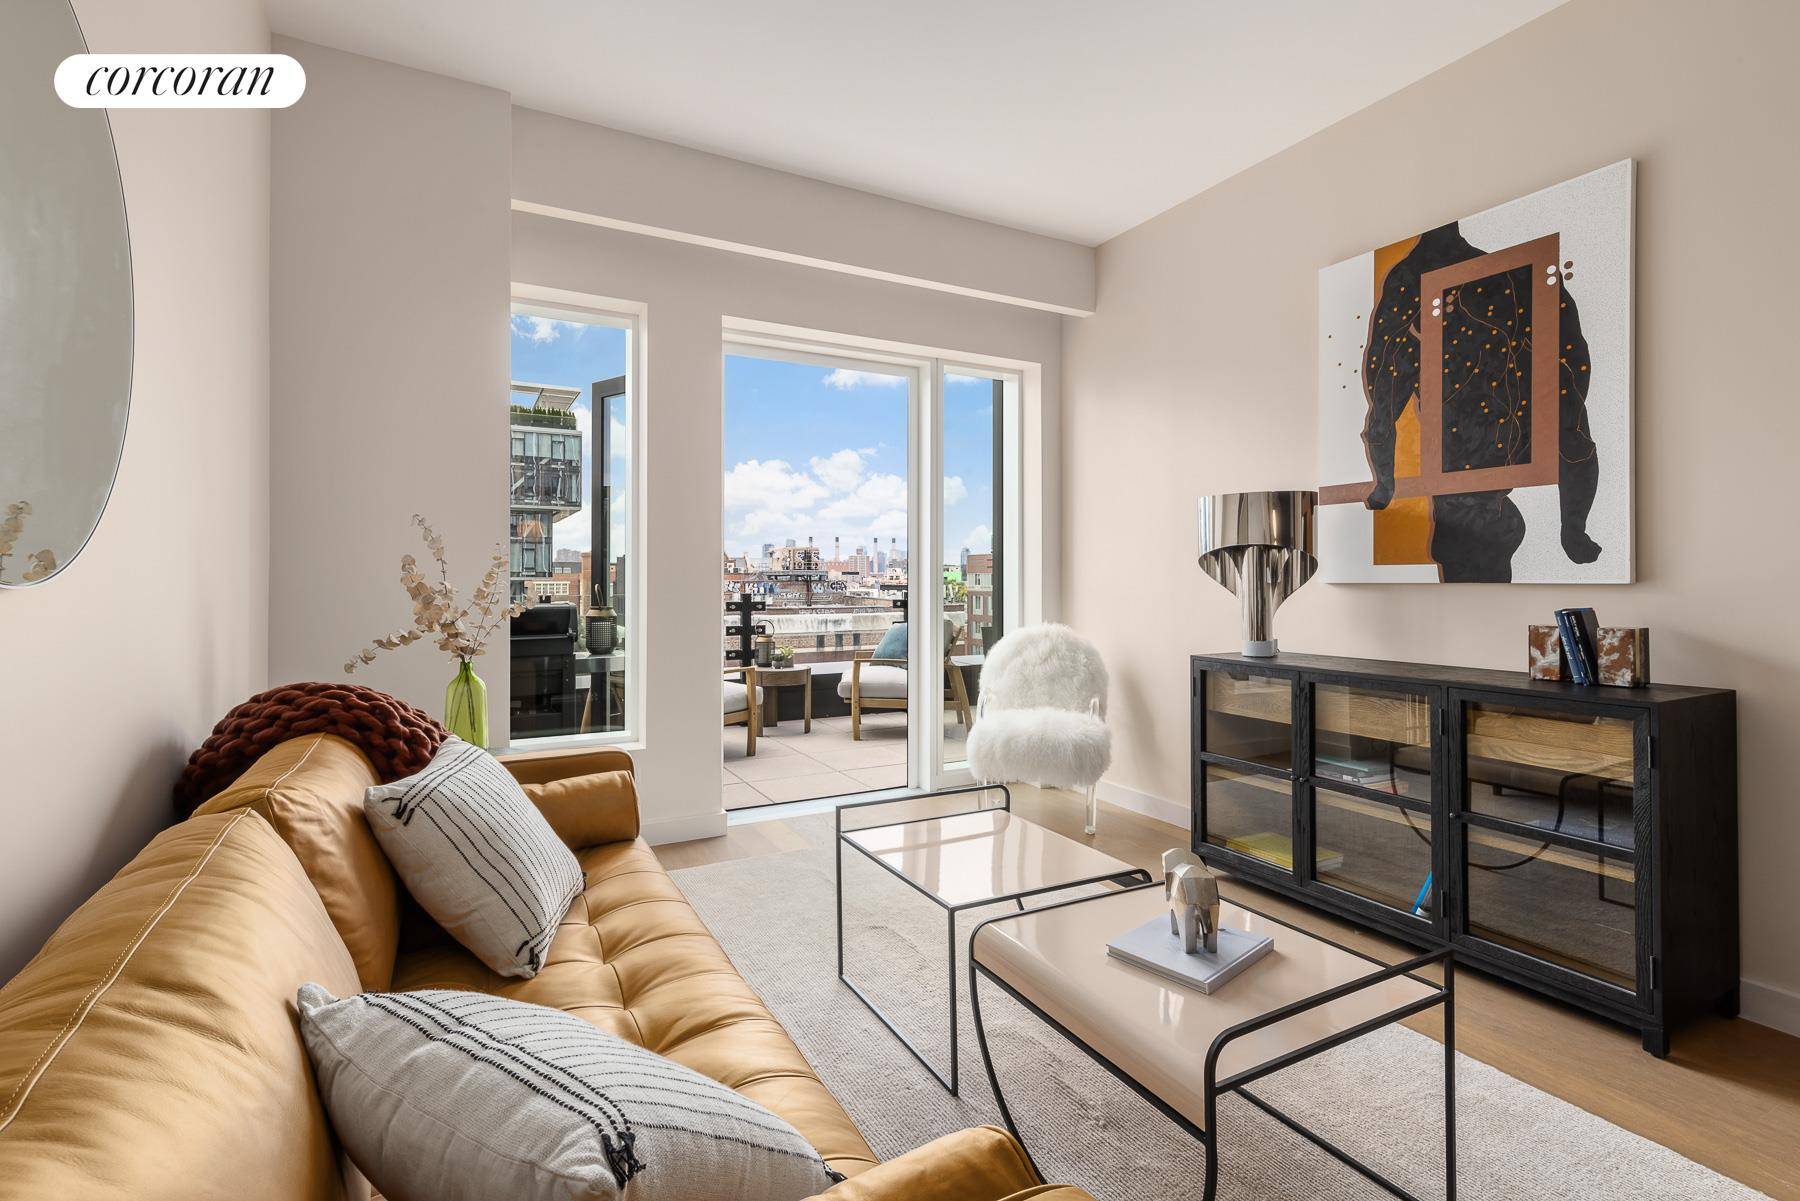 PRICE IMPROVEMENT FINAL OPPORTUNITIES ASK US ABOUT END OF YEAR PURCHASER INCENTIVES Sitting at the heart of this authentic and historic New York neighborhood One Essex Crossing is the premier ...